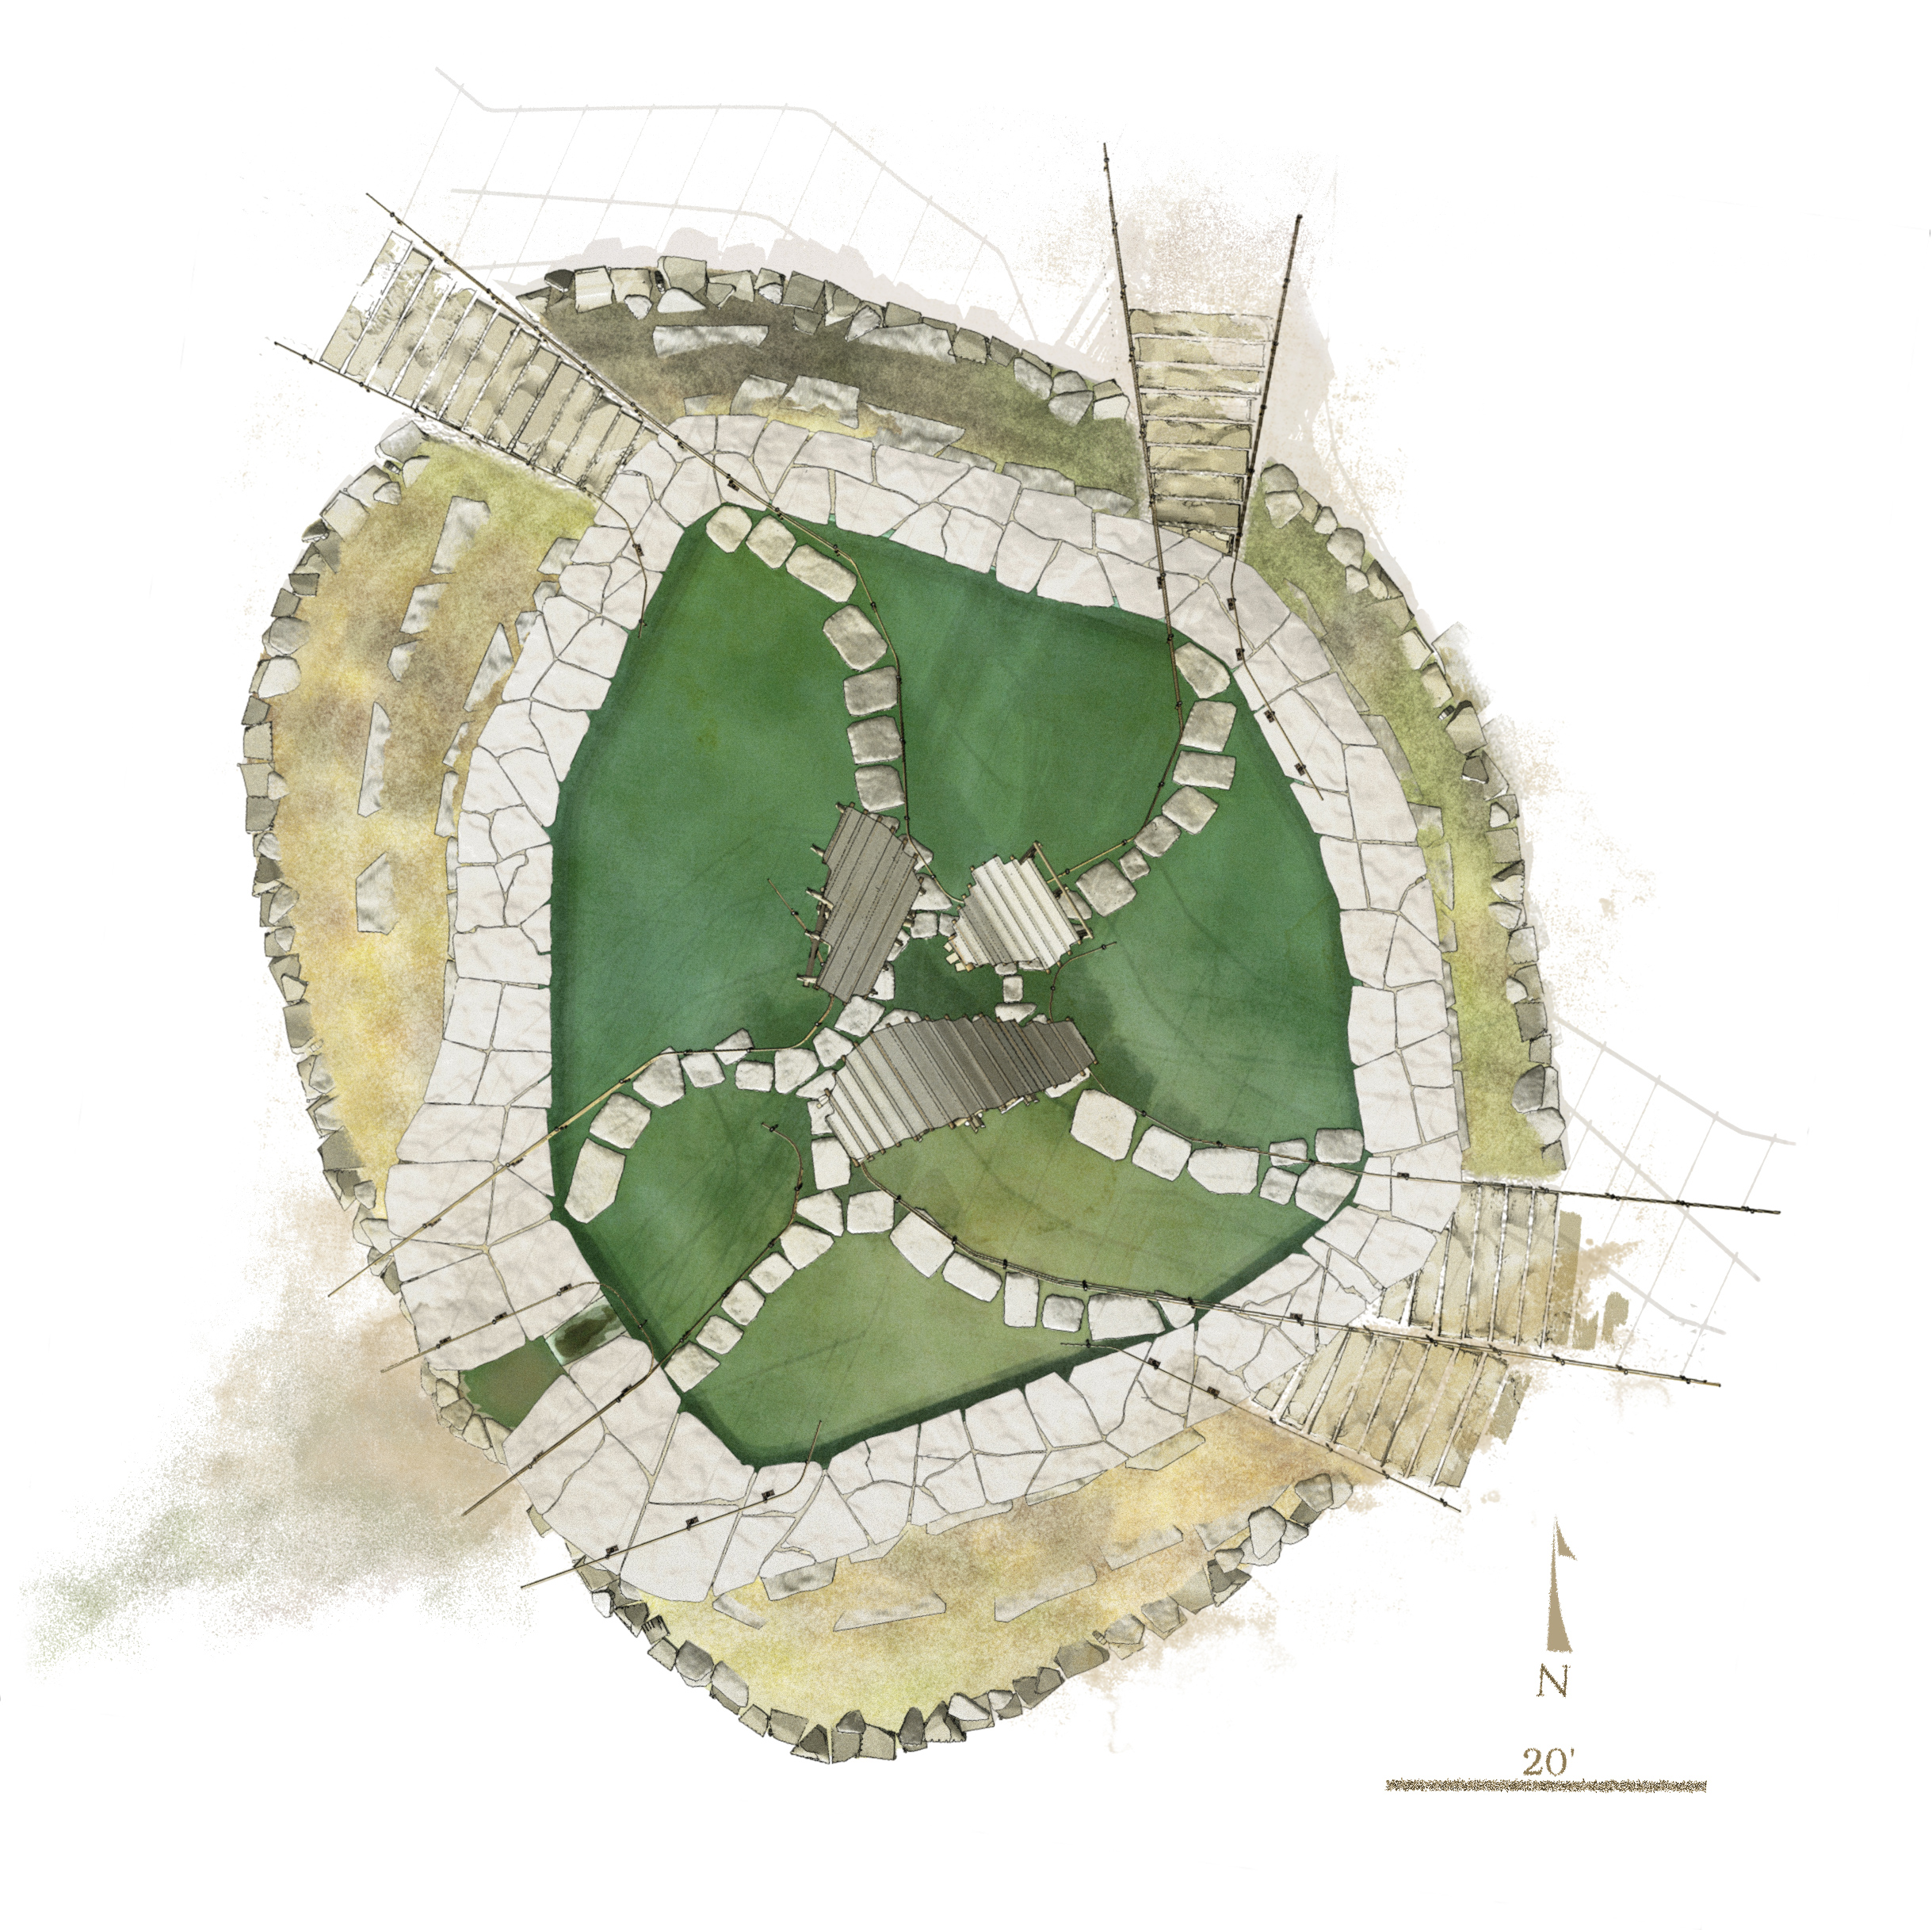 Well of L (2011) plan view with scale, v.2